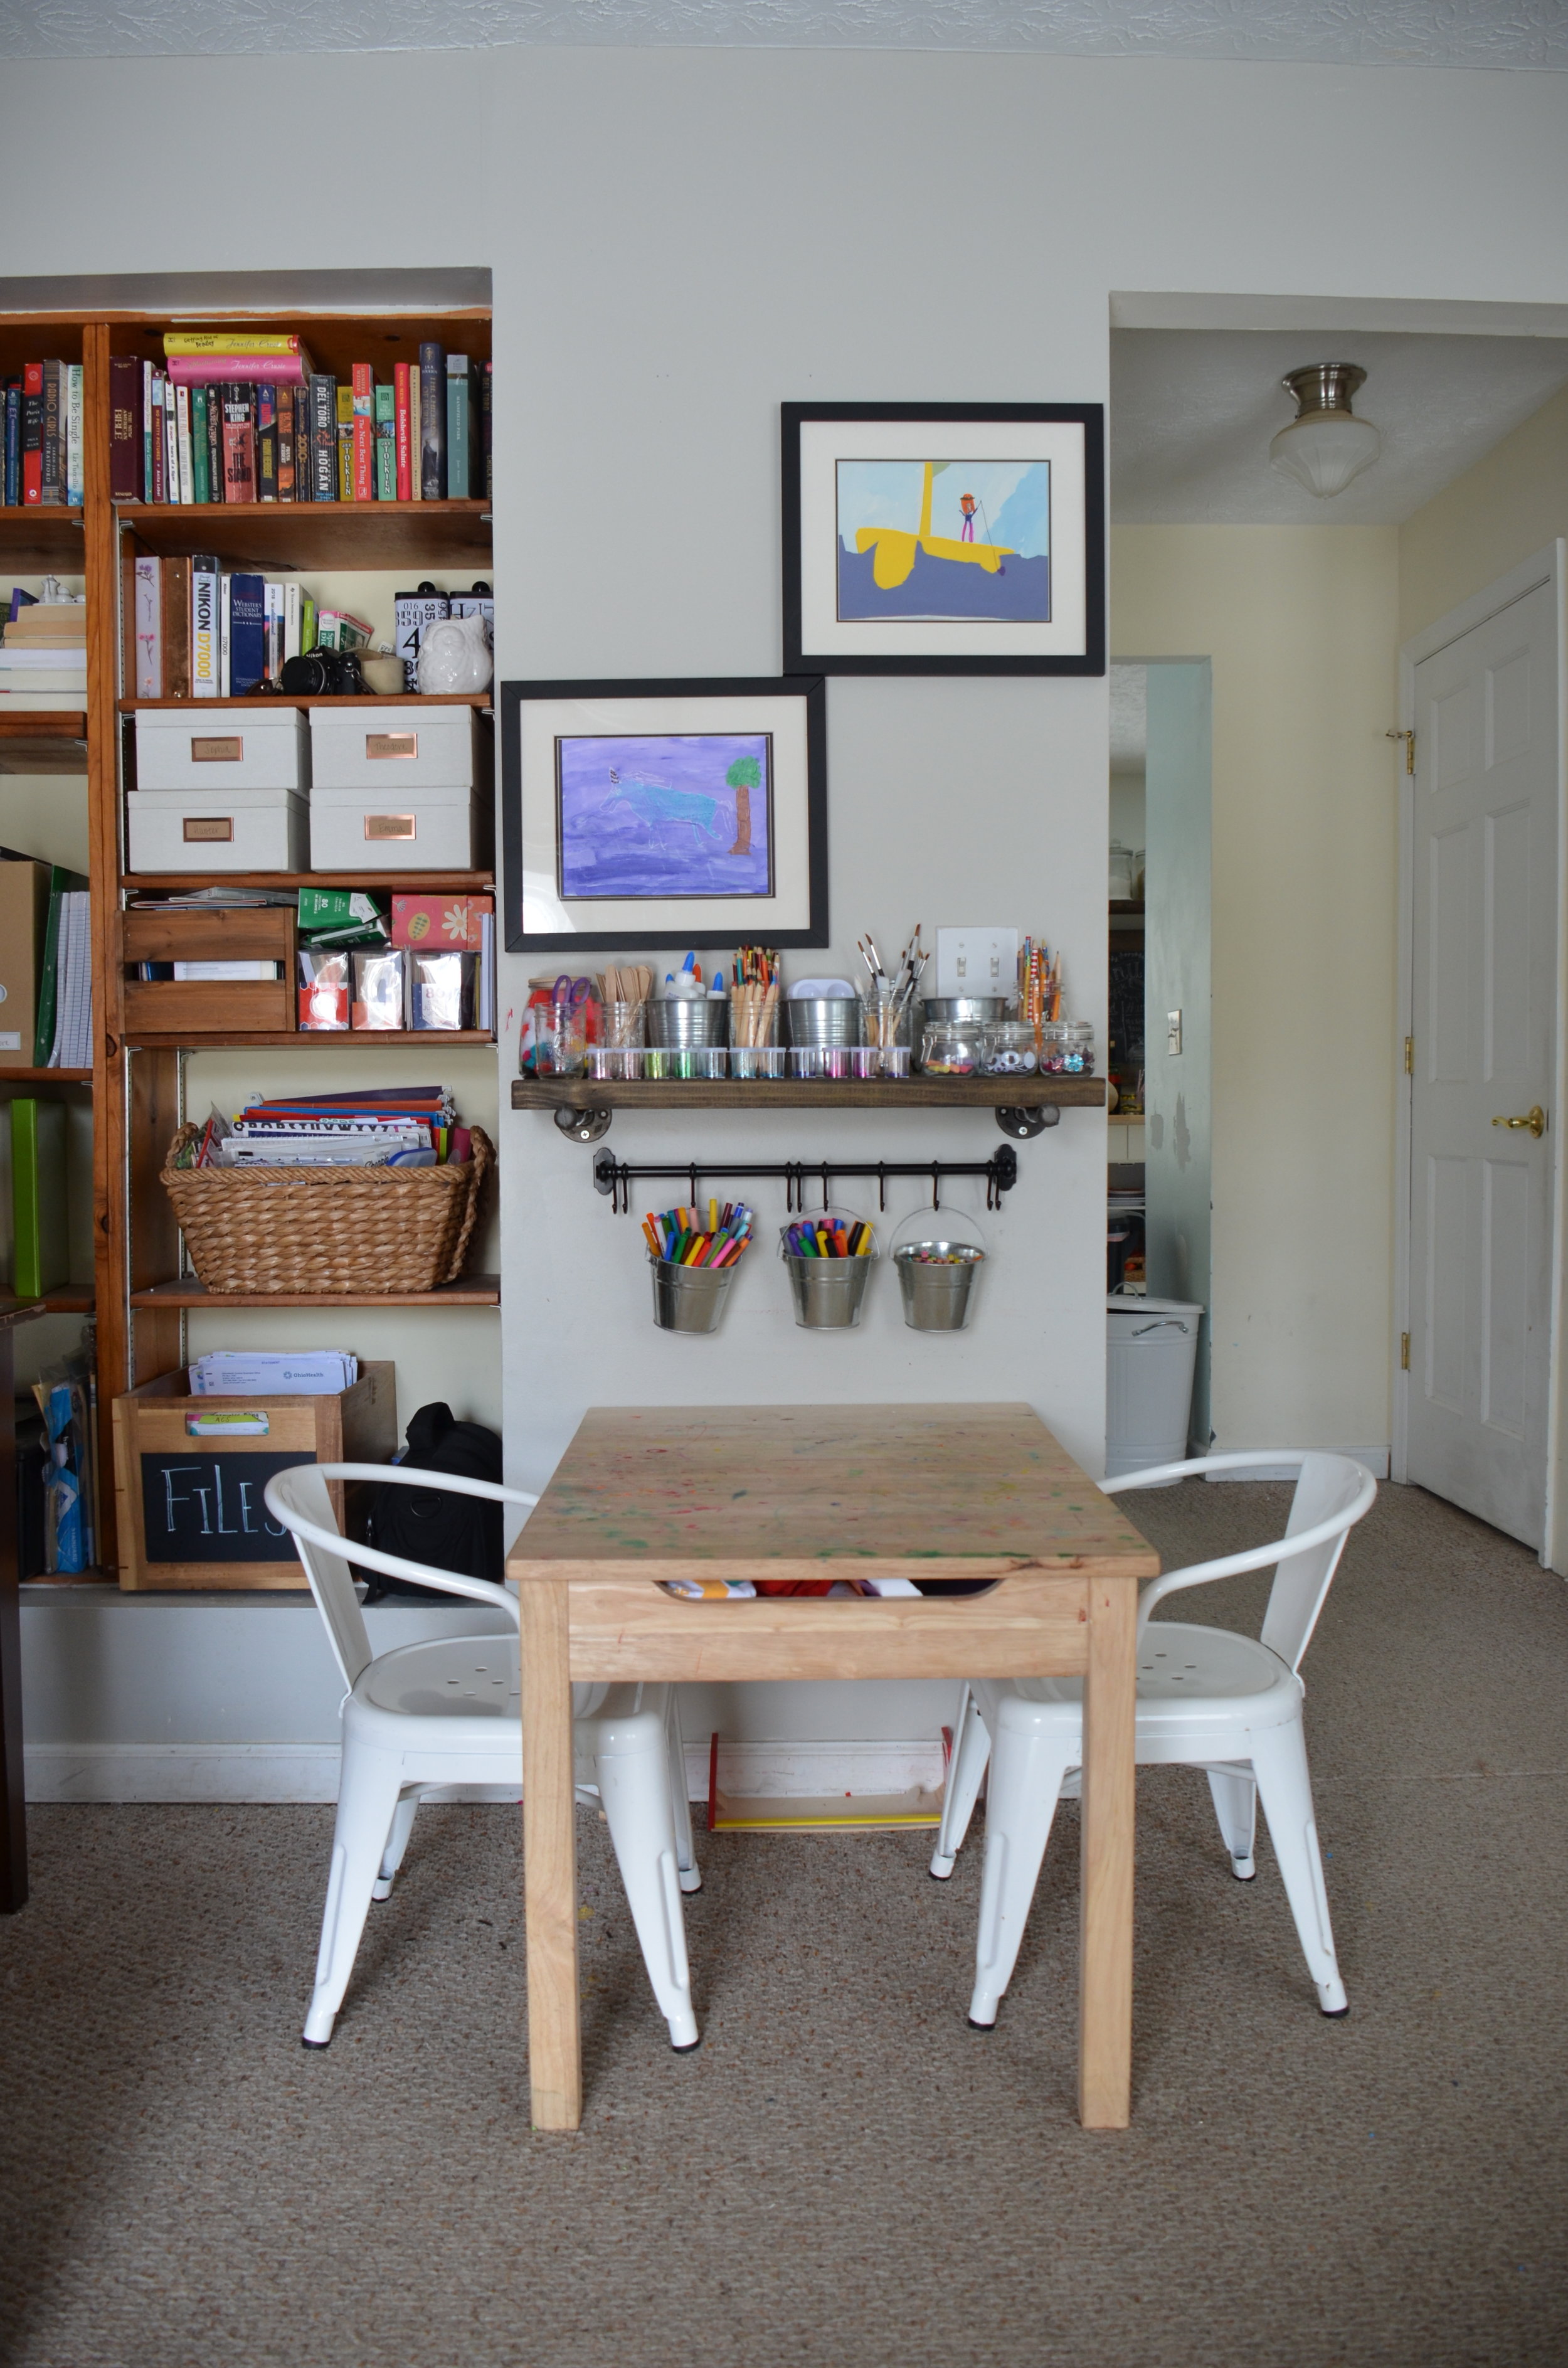 How To Set Up A Kids Art Homework Area In A Small Space